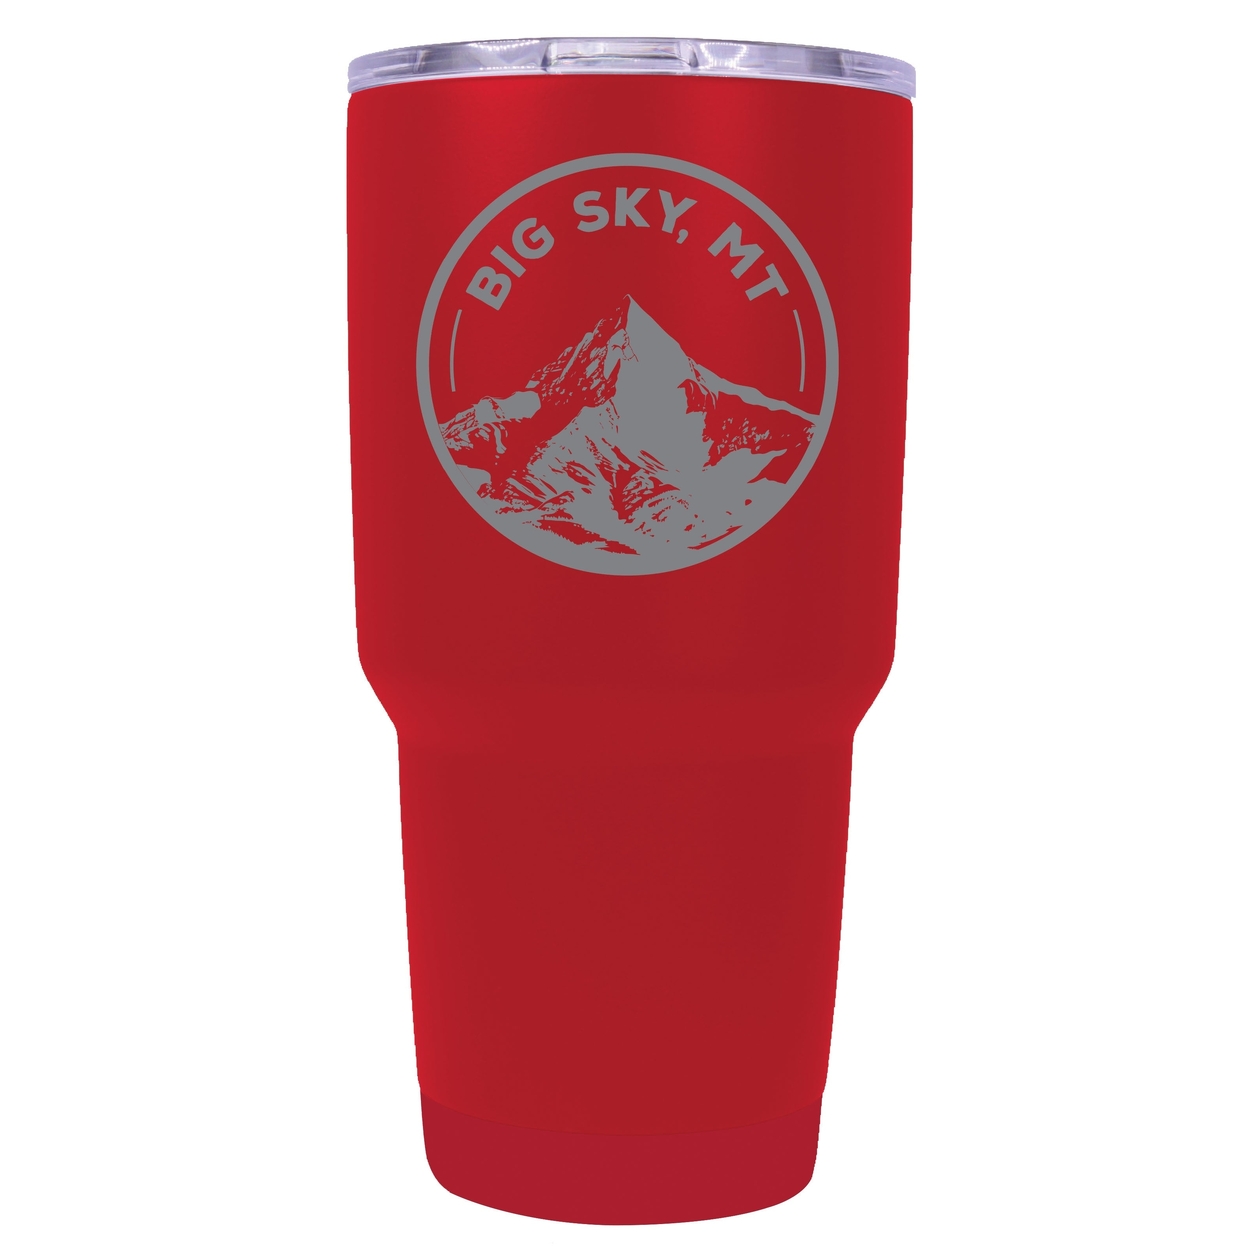 Big Sky Montana Souvenir 24 Oz Engraved Insulated Stainless Steel Tumbler - Coral,,4-Pack